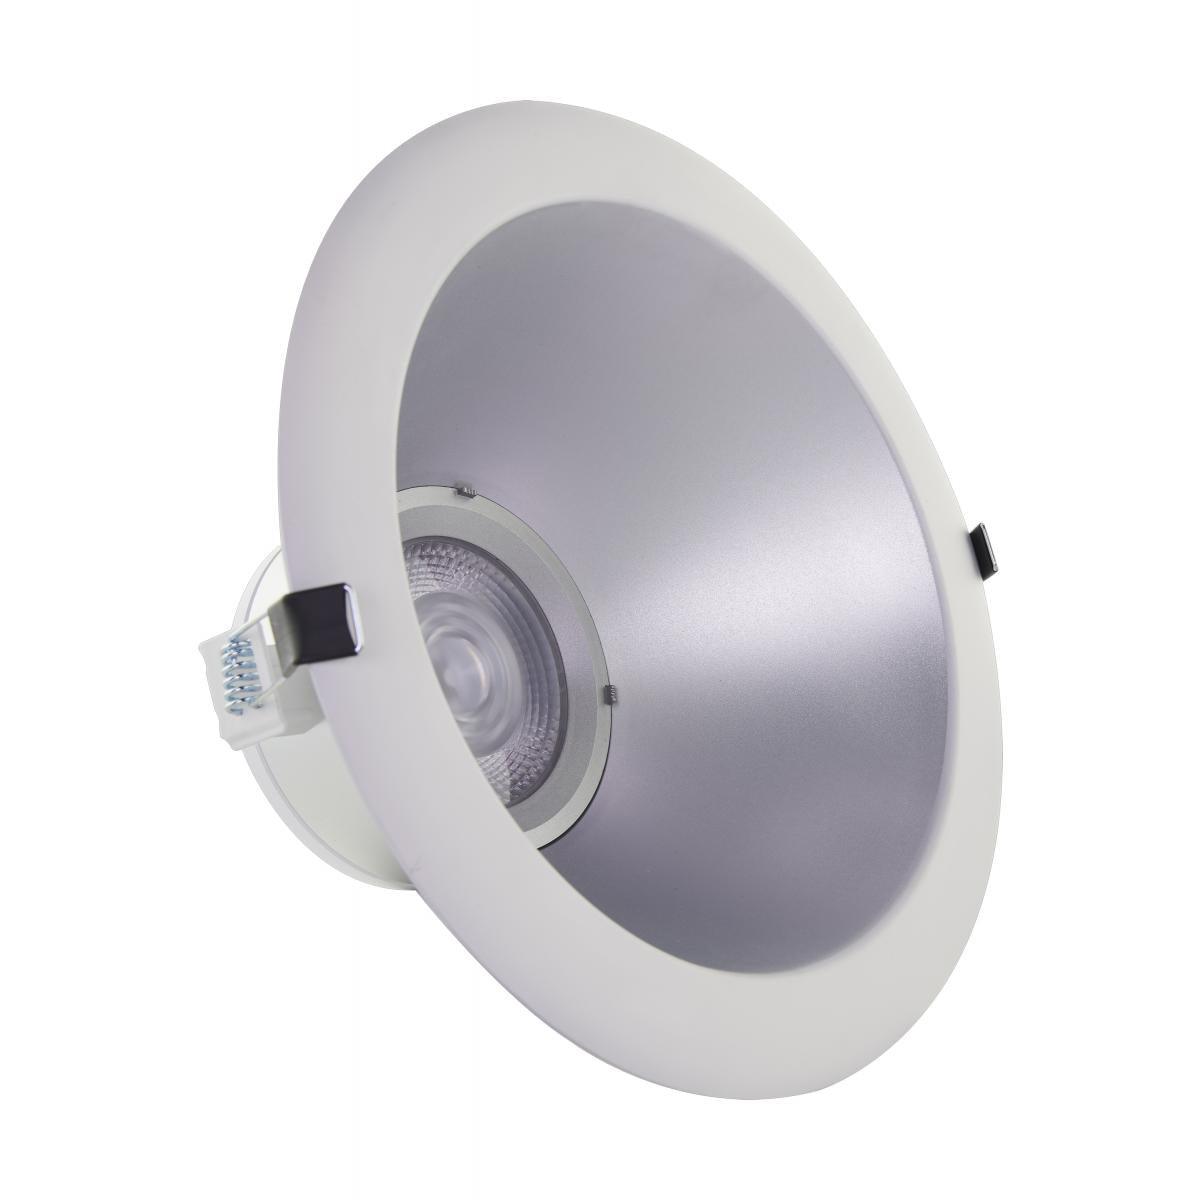 8 In. Commercial Canless LED Recessed Light, 32 Watt, 2450 Lumens, Selectable CCT, 2700K to 5000K, Silver Finish - Bees Lighting